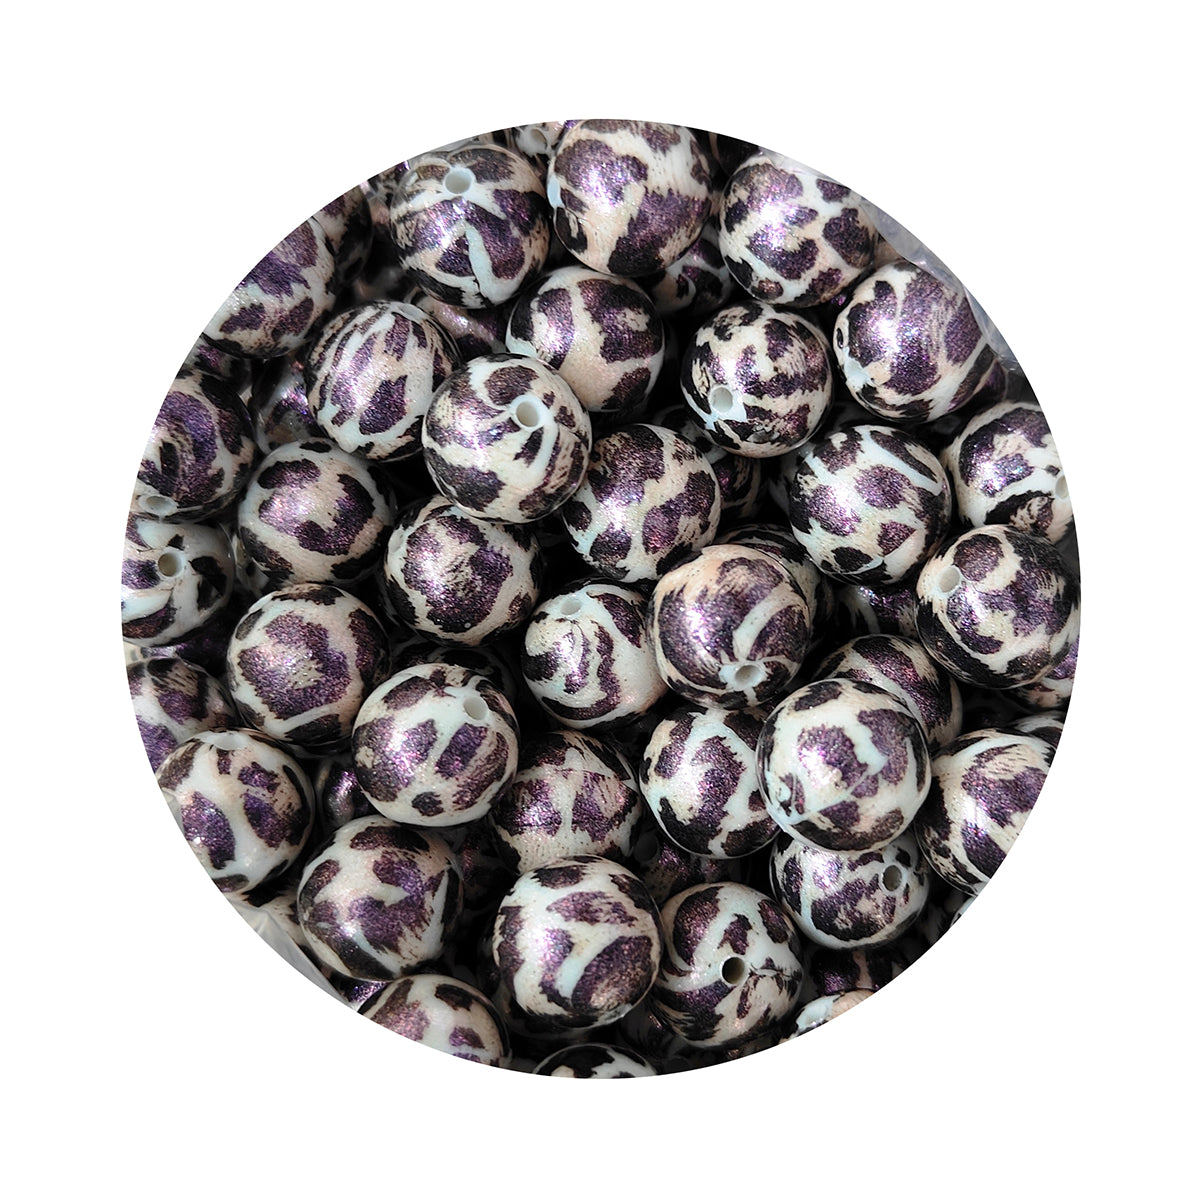 15mm Deep Purple Silicone Beads, Silicone Beads in Bulk, 15mm Silicone  Bubblegum Beads, Chunky Beads 